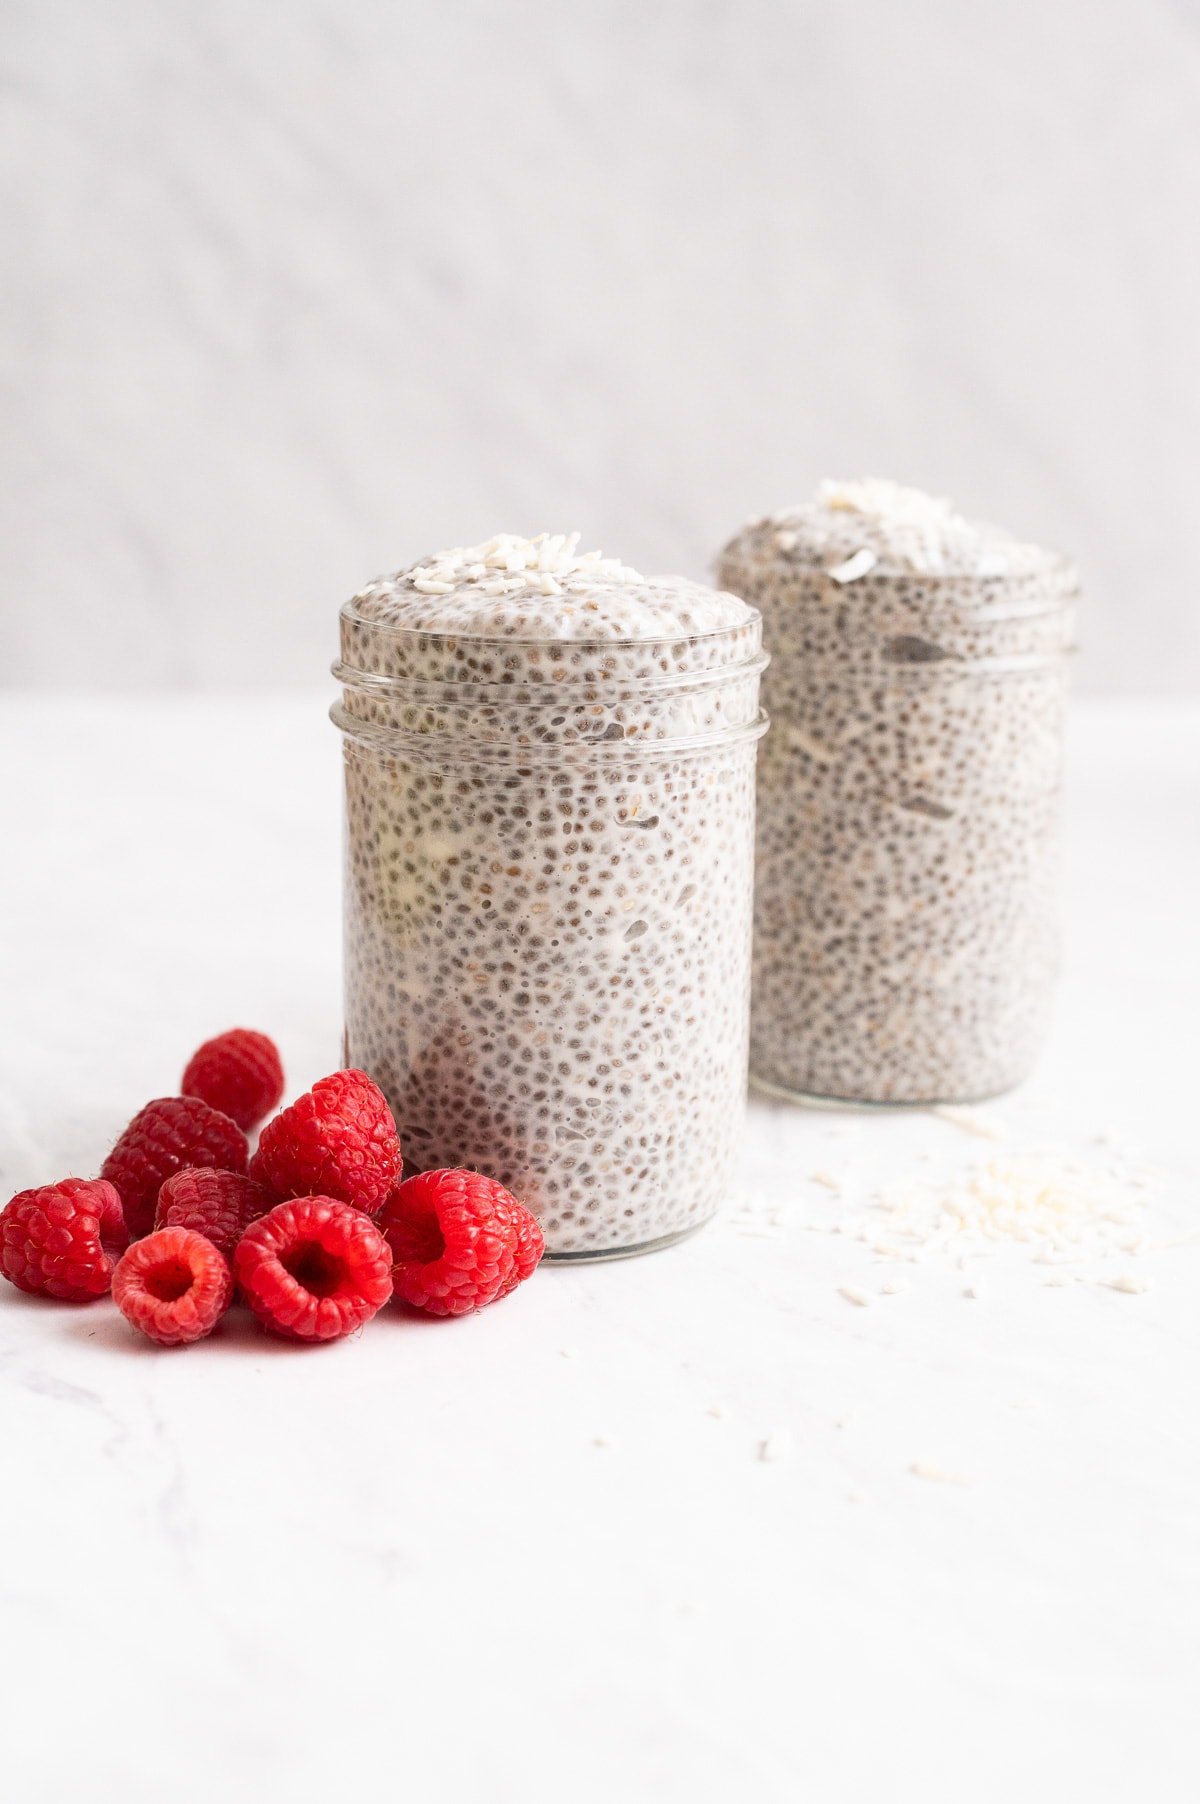 Two jars with coconut milk chia pudding and raspberries.